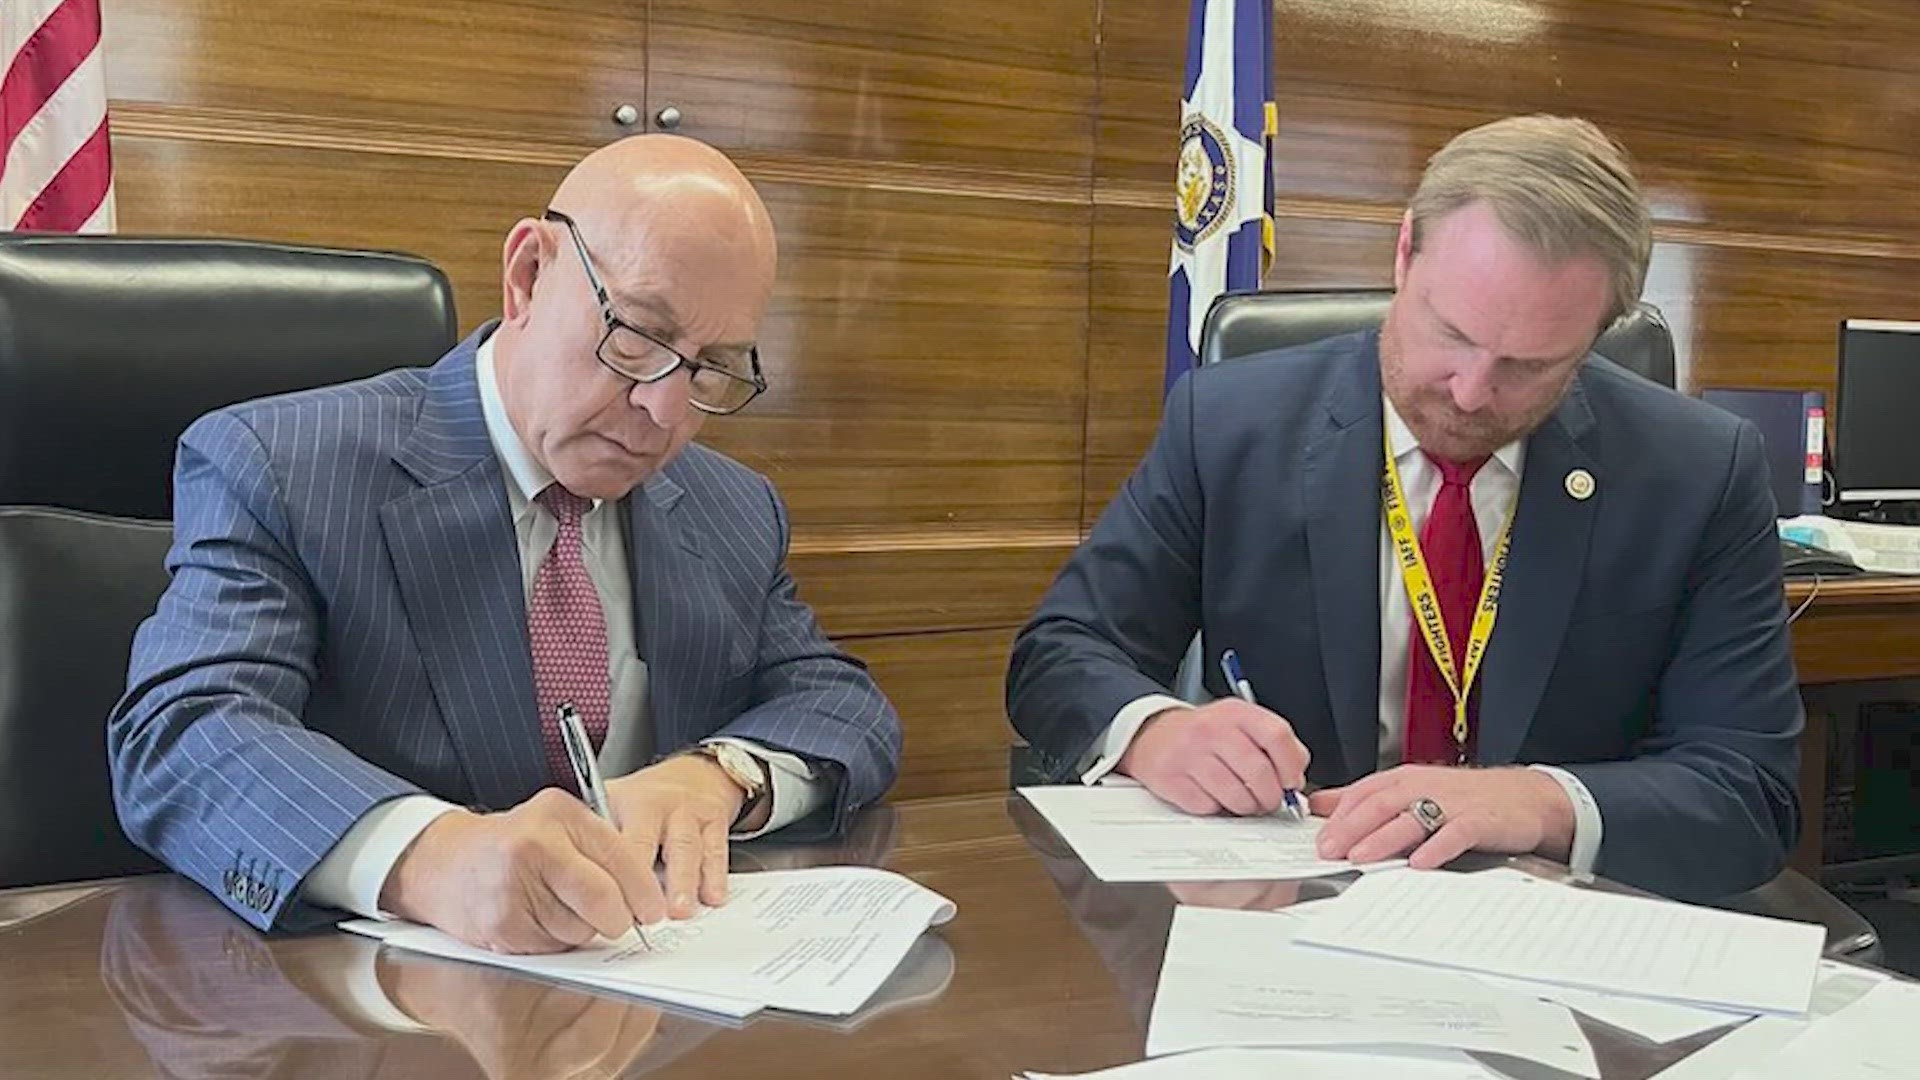 The agreement hammered out by Mayor John Whitmire and the firefighters union also makes a 2021 temporary 18% pay increase permanent.